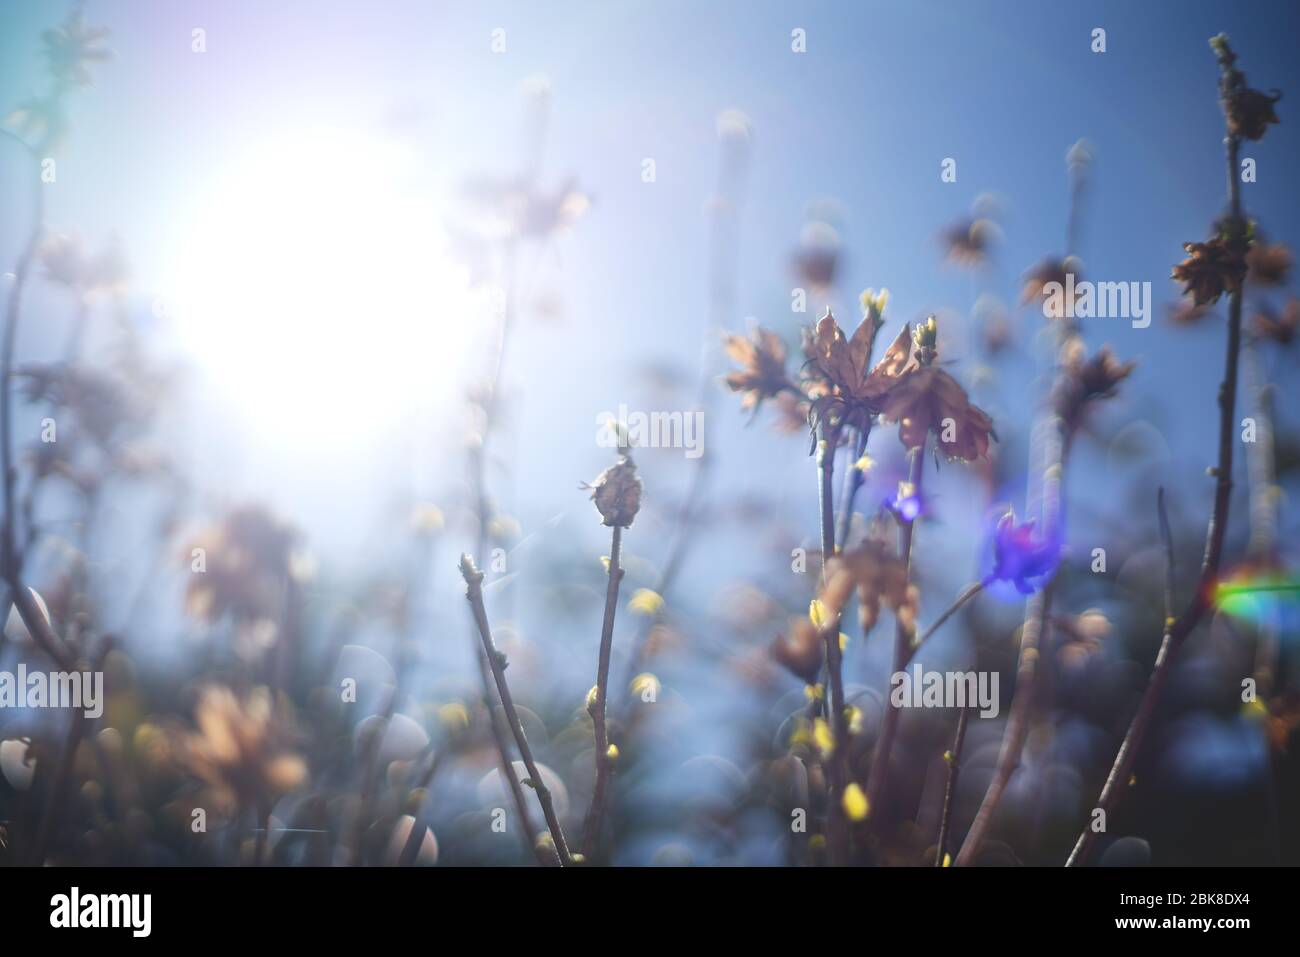 Blurred branches of bush with backlight, bokeh and lens flare during spring time Stock Photo